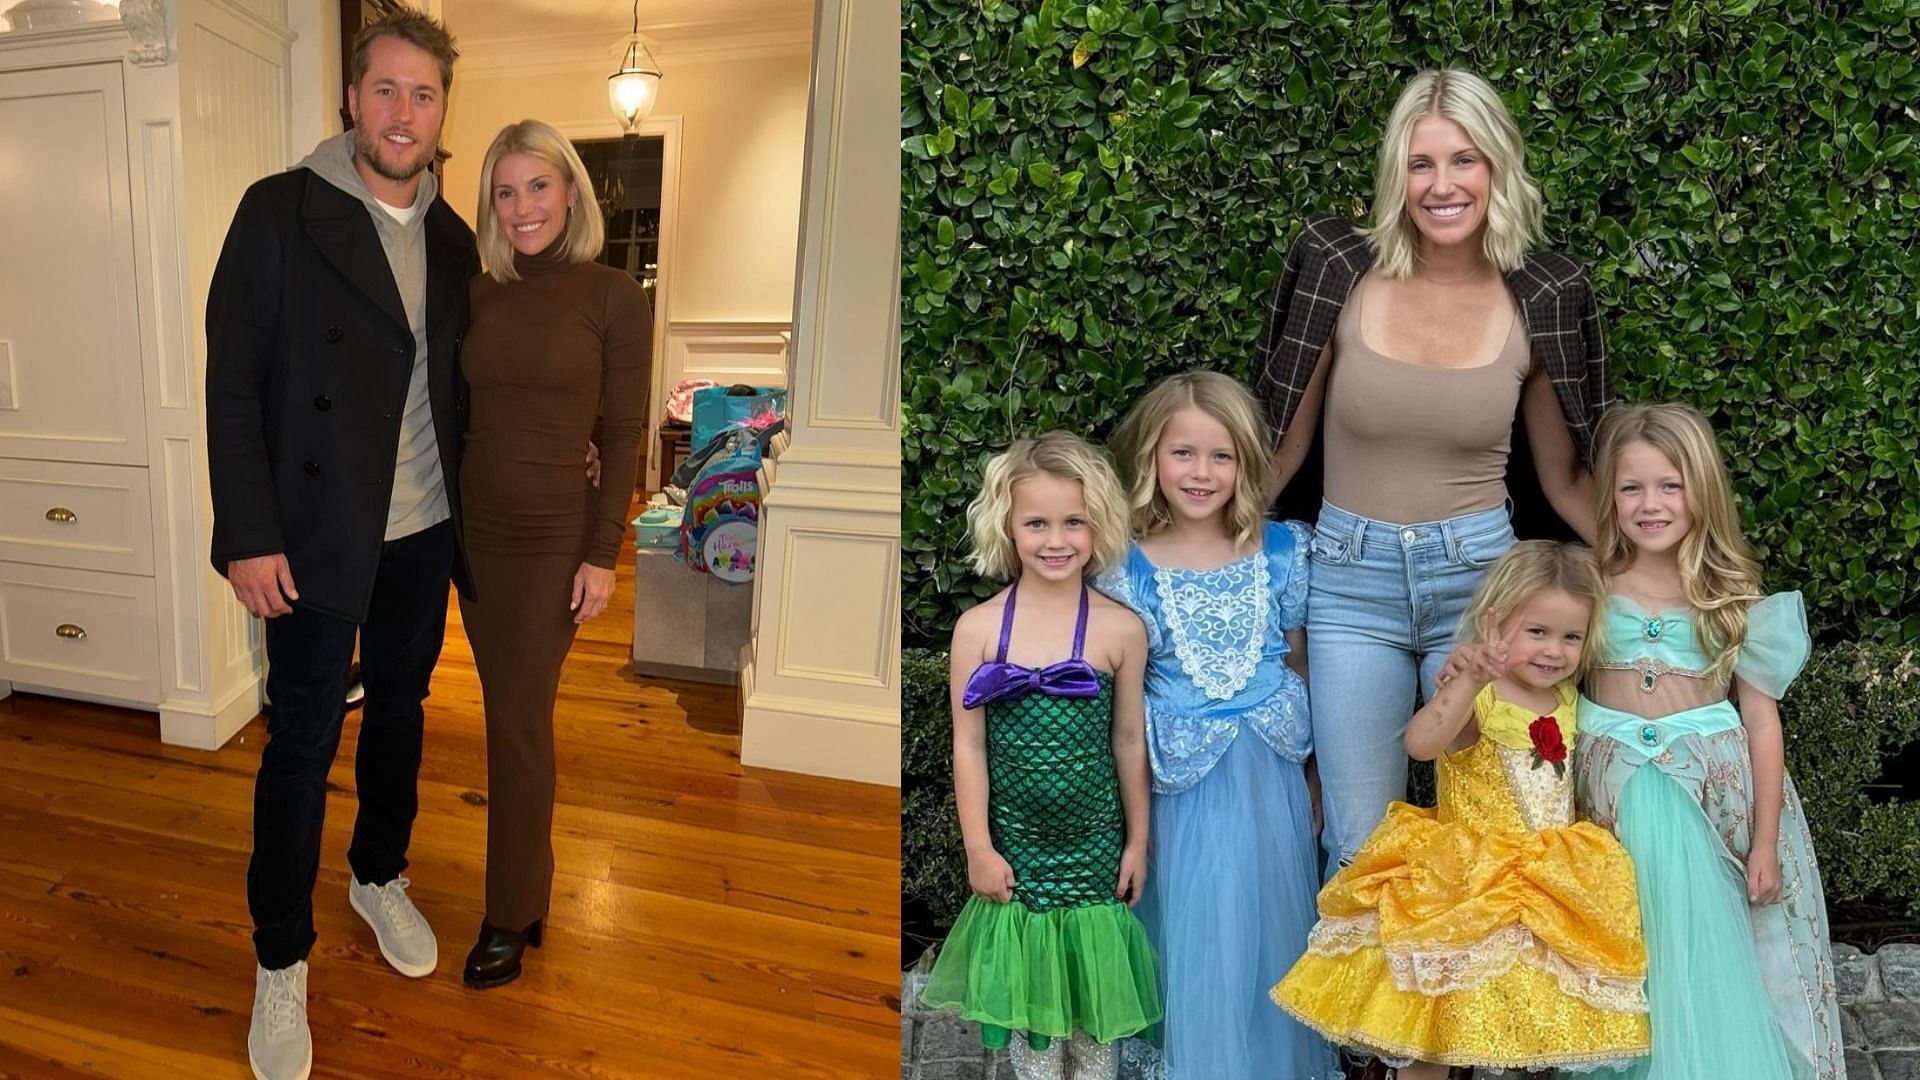 Matthew Stafford and wife Kelly (left) celebrates Christmas eve with family after Rams QB&rsquo;s stunning outing in Week 16